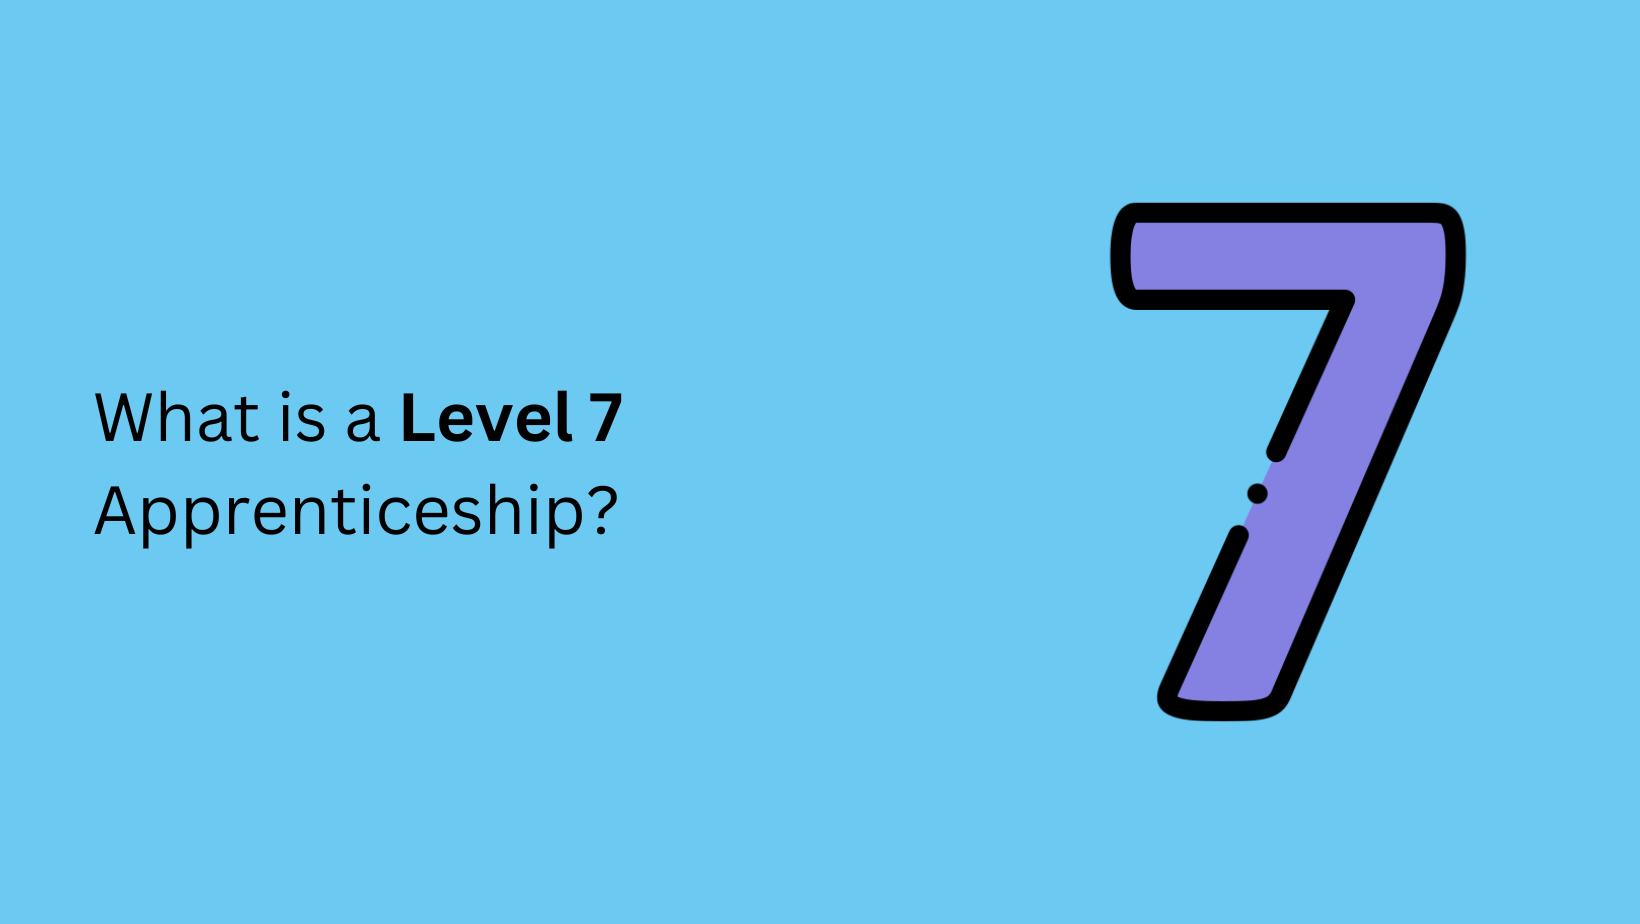 What is a Level 7 Apprenticeship